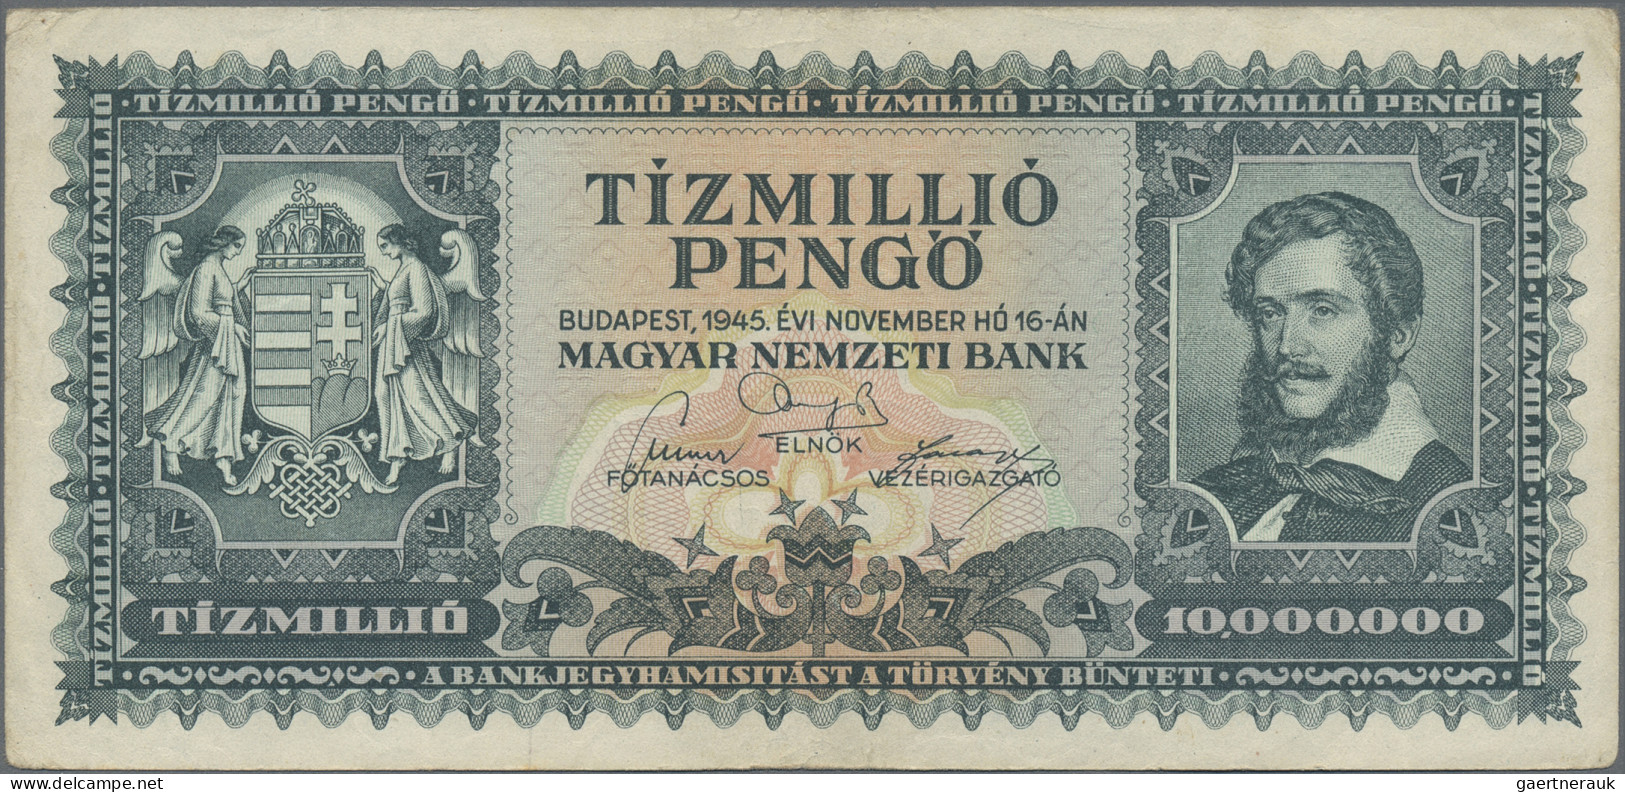 Hungary: Hungary, Inflation Lot With 13 Banknotes 1945-1946 Series, 500 Pengö – - Hongrie